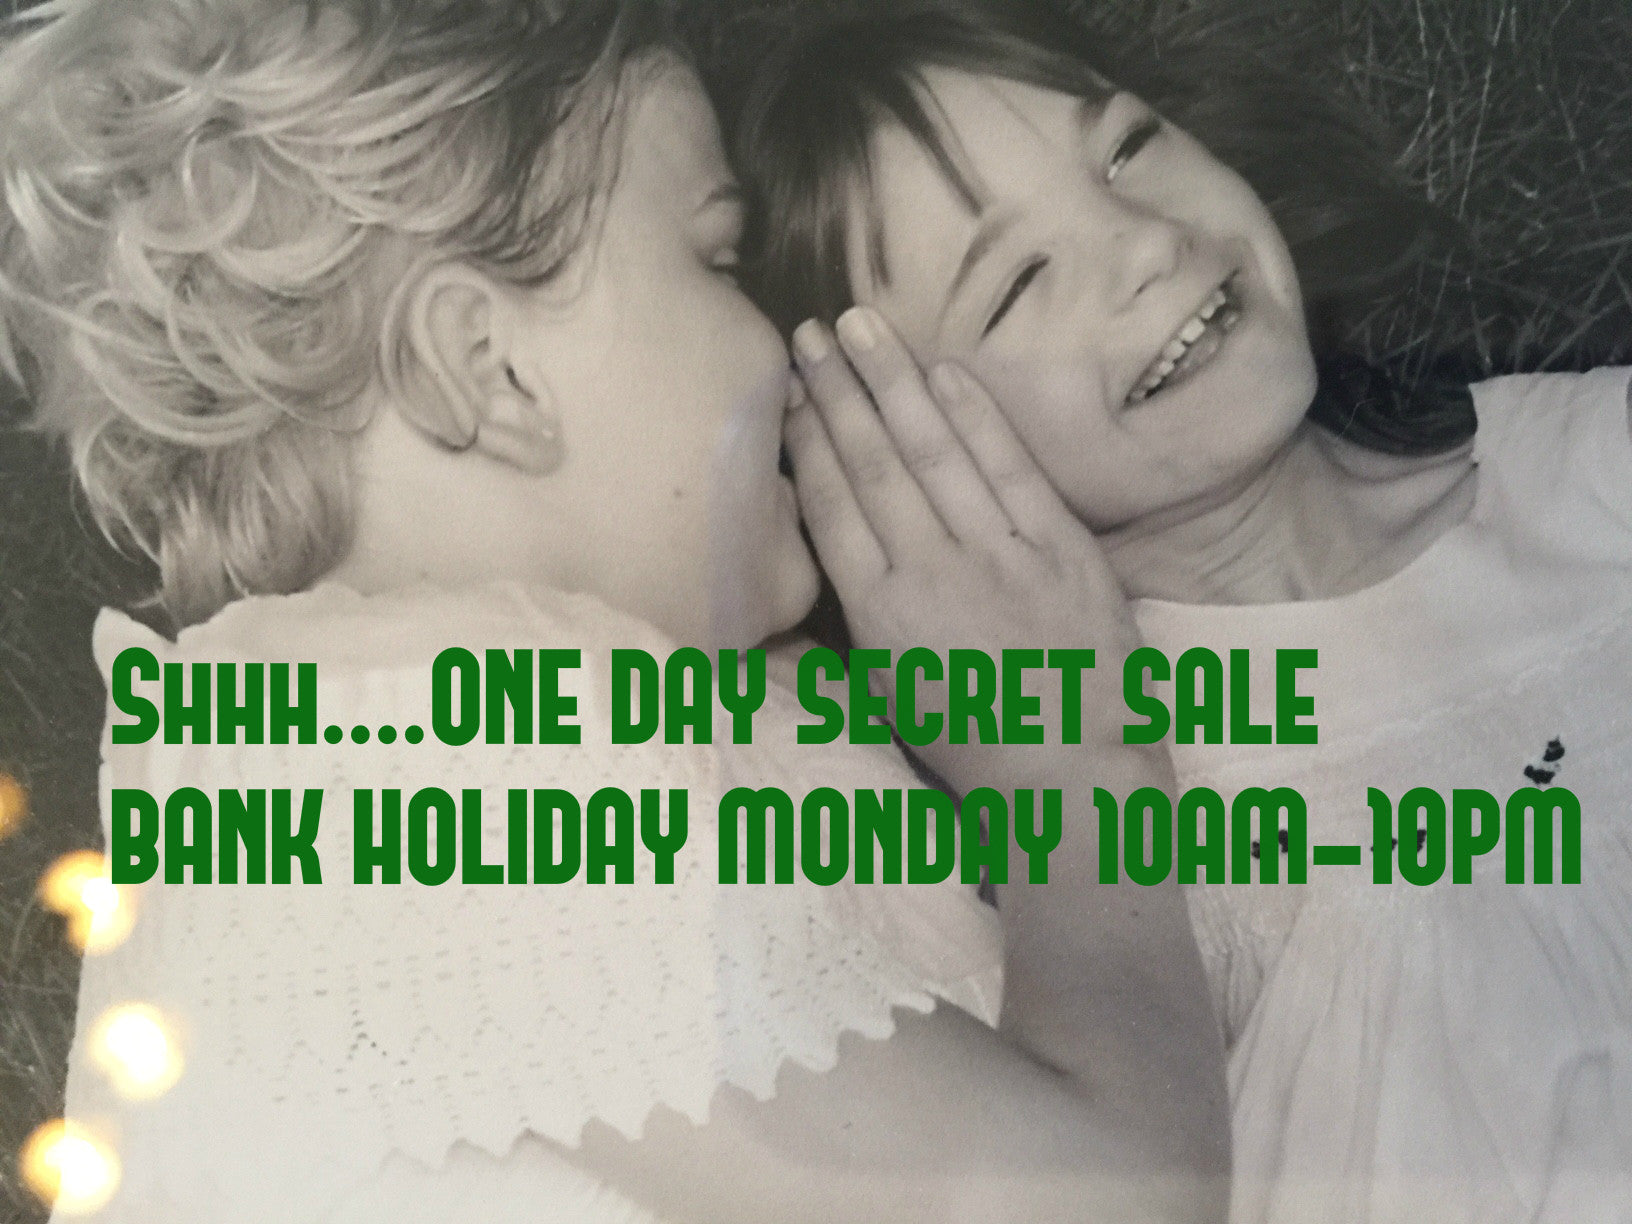 DRAT! LOOKS LIKE YOU MISSED THE SECRET SALE..SIGN UP TO FIND OUT ABOUT THE NEXT ONE....